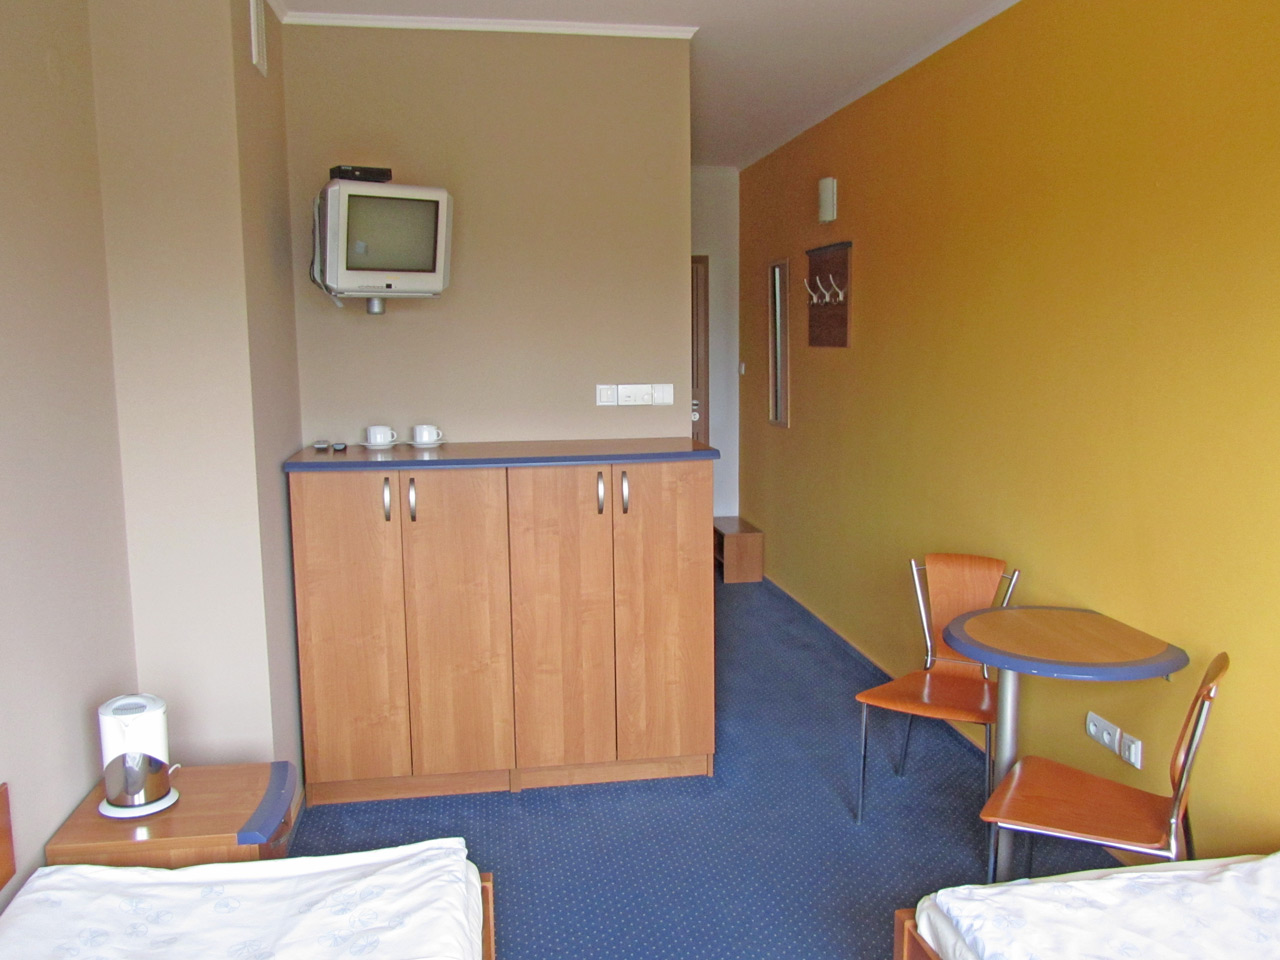 ROOMS Krosno accommodation in the city center, rest in Poland 07